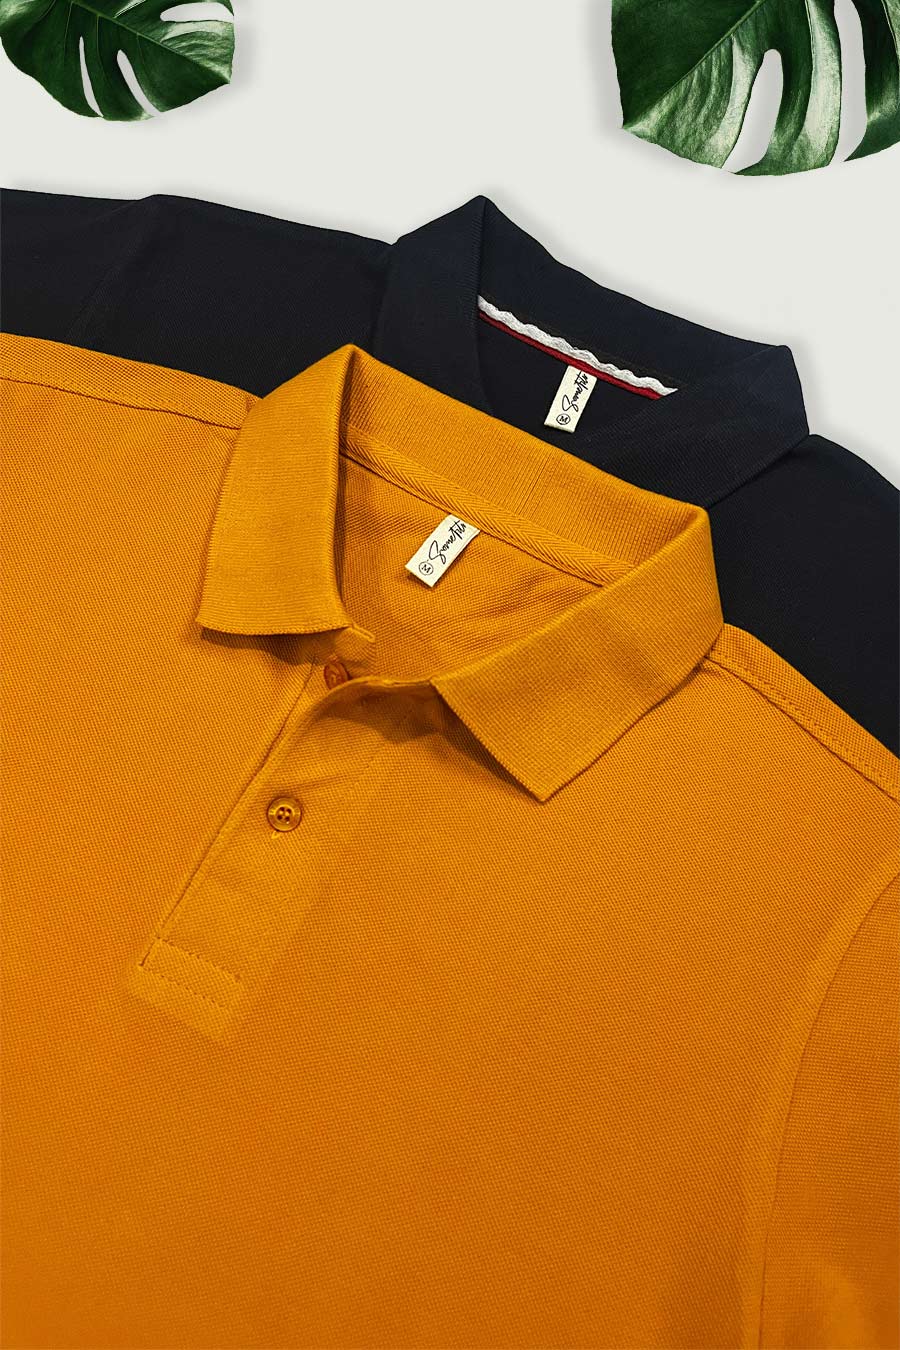 Pack 2 - Musturd & Navy Blue - Classic Polo